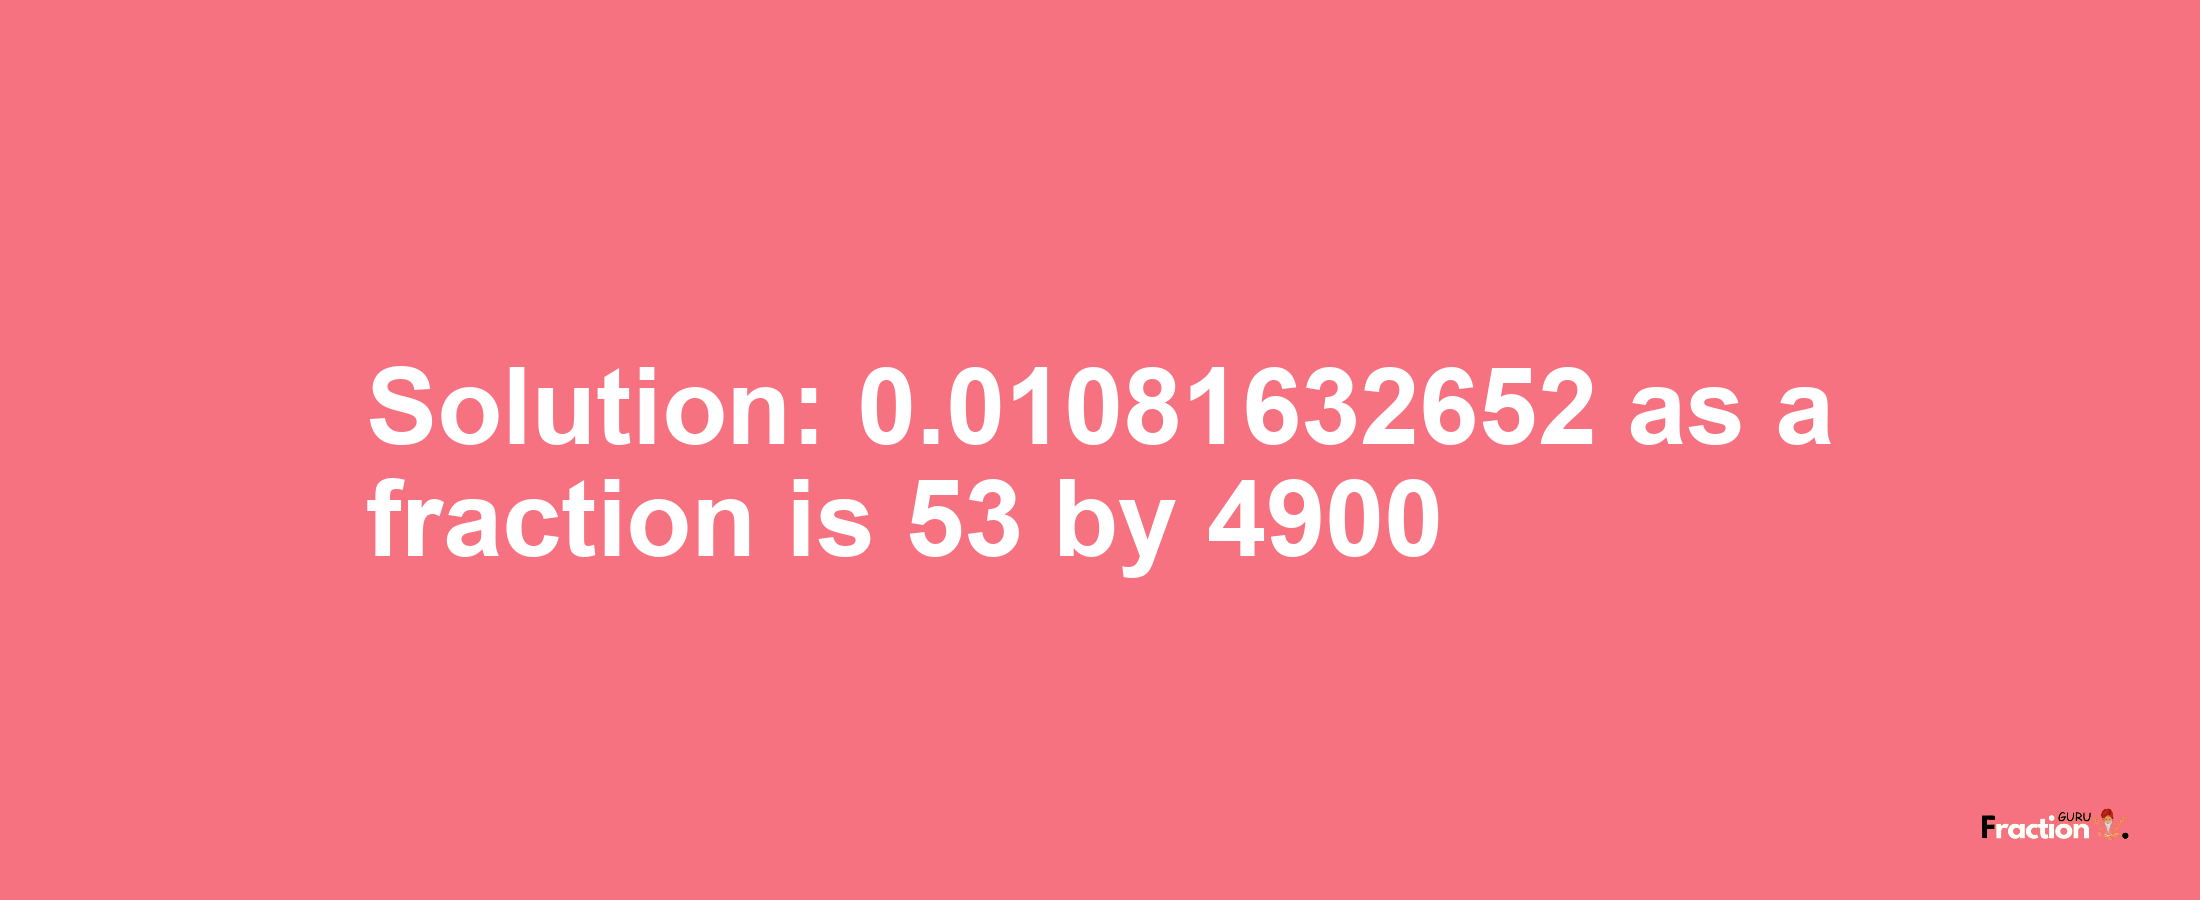 Solution:0.01081632652 as a fraction is 53/4900